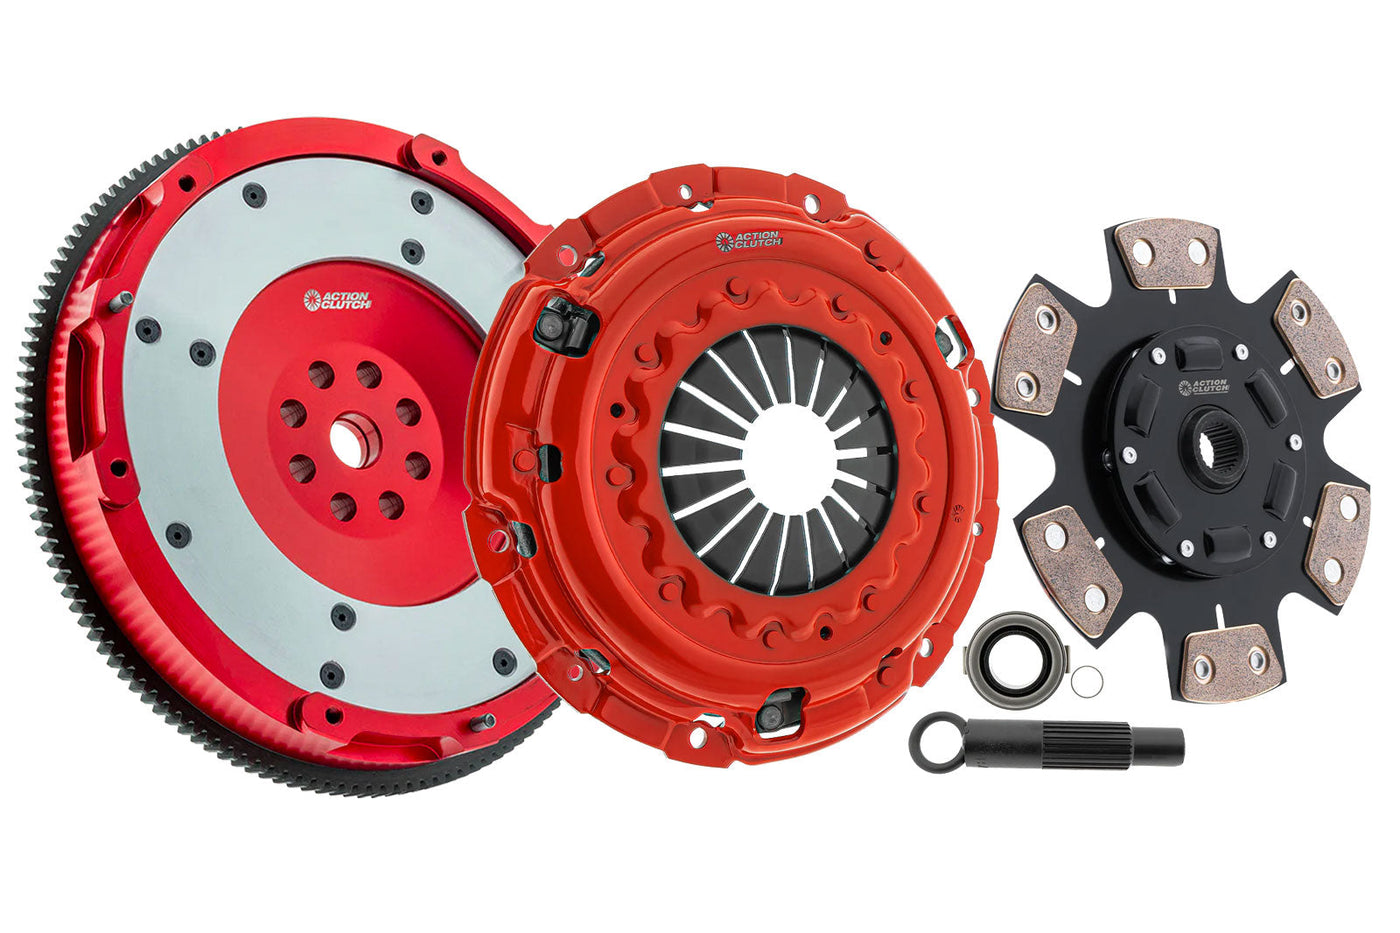 Stage 3 Clutch Kit (1MS) for Honda Civic SI 2022 1.5L (L15B7) Turbo Includes Aluminum Lightweight Flywheel